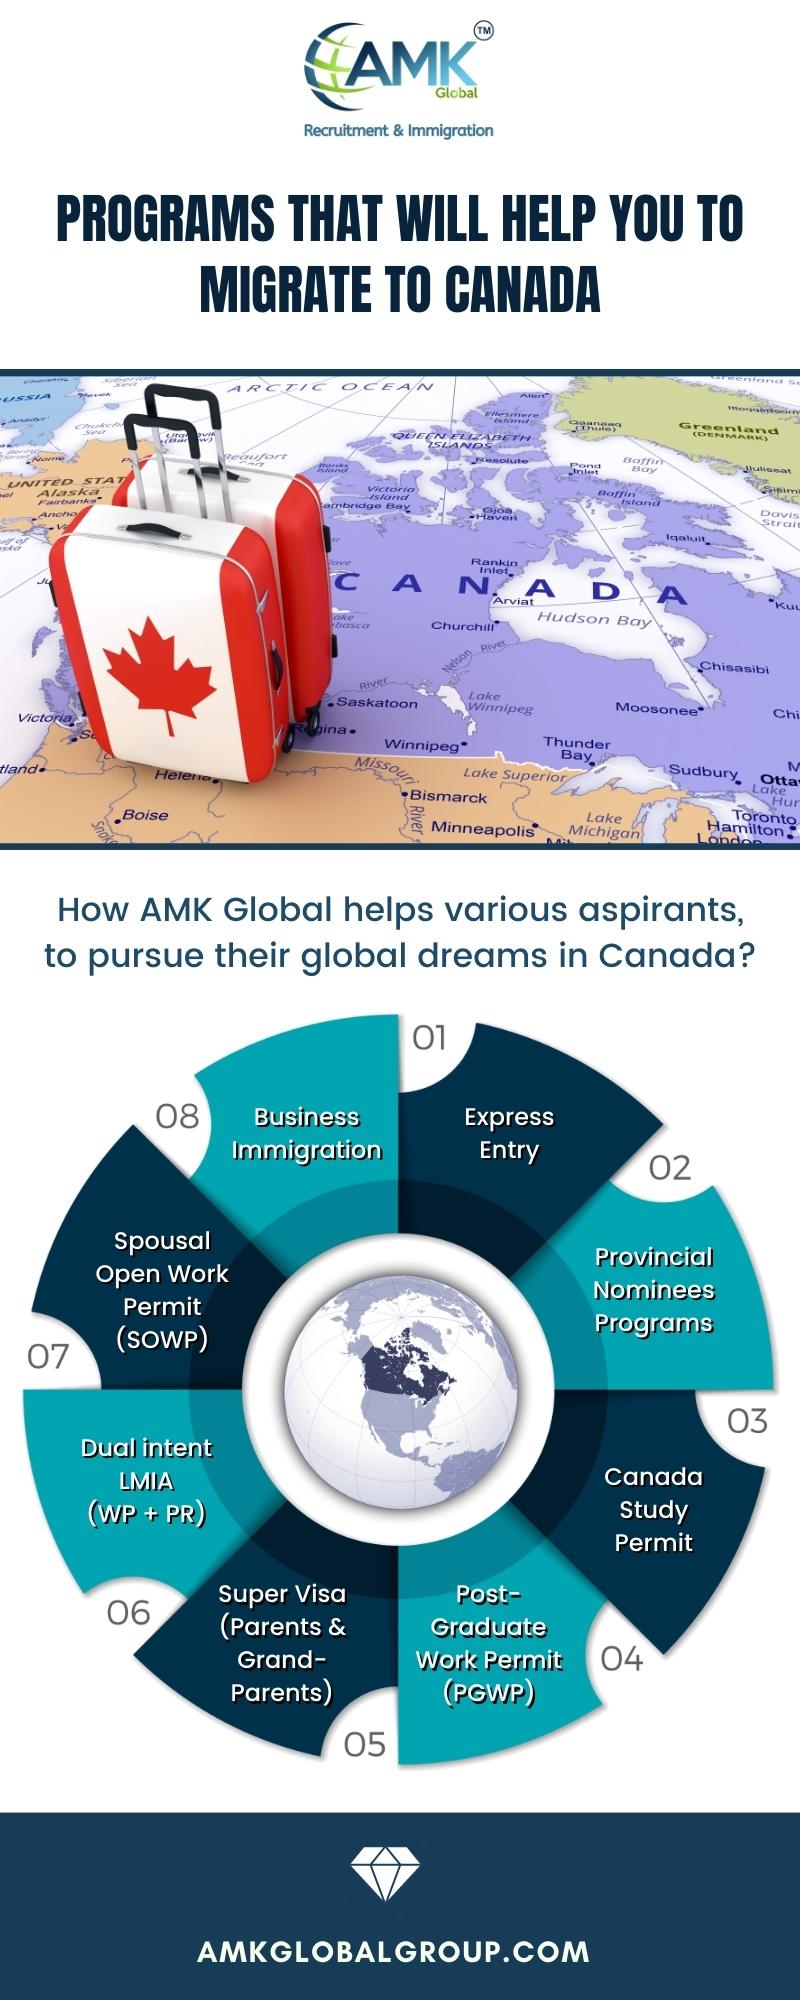 CAMKC

Recruitment & Immigration

PROGRAMS THAT WILL HELP YOU TO
MIGRATE TO CANADA

 

How AMK Global helps various aspirants,
to pursue their global dreams in Canada?

Business [3111
Immigration Entry

Spousal
Open Work
10a
(Ye)

Provincial
Nominees
Programs

Duallintent —
YI % Canada
(WP'+ PR) — BLL
[10a]

Super Visa HefS es

(Parents & Graduate
Grand- Work Permit
LIER) (PeWP)

A 4

AMKGLOBALGROUP.COM